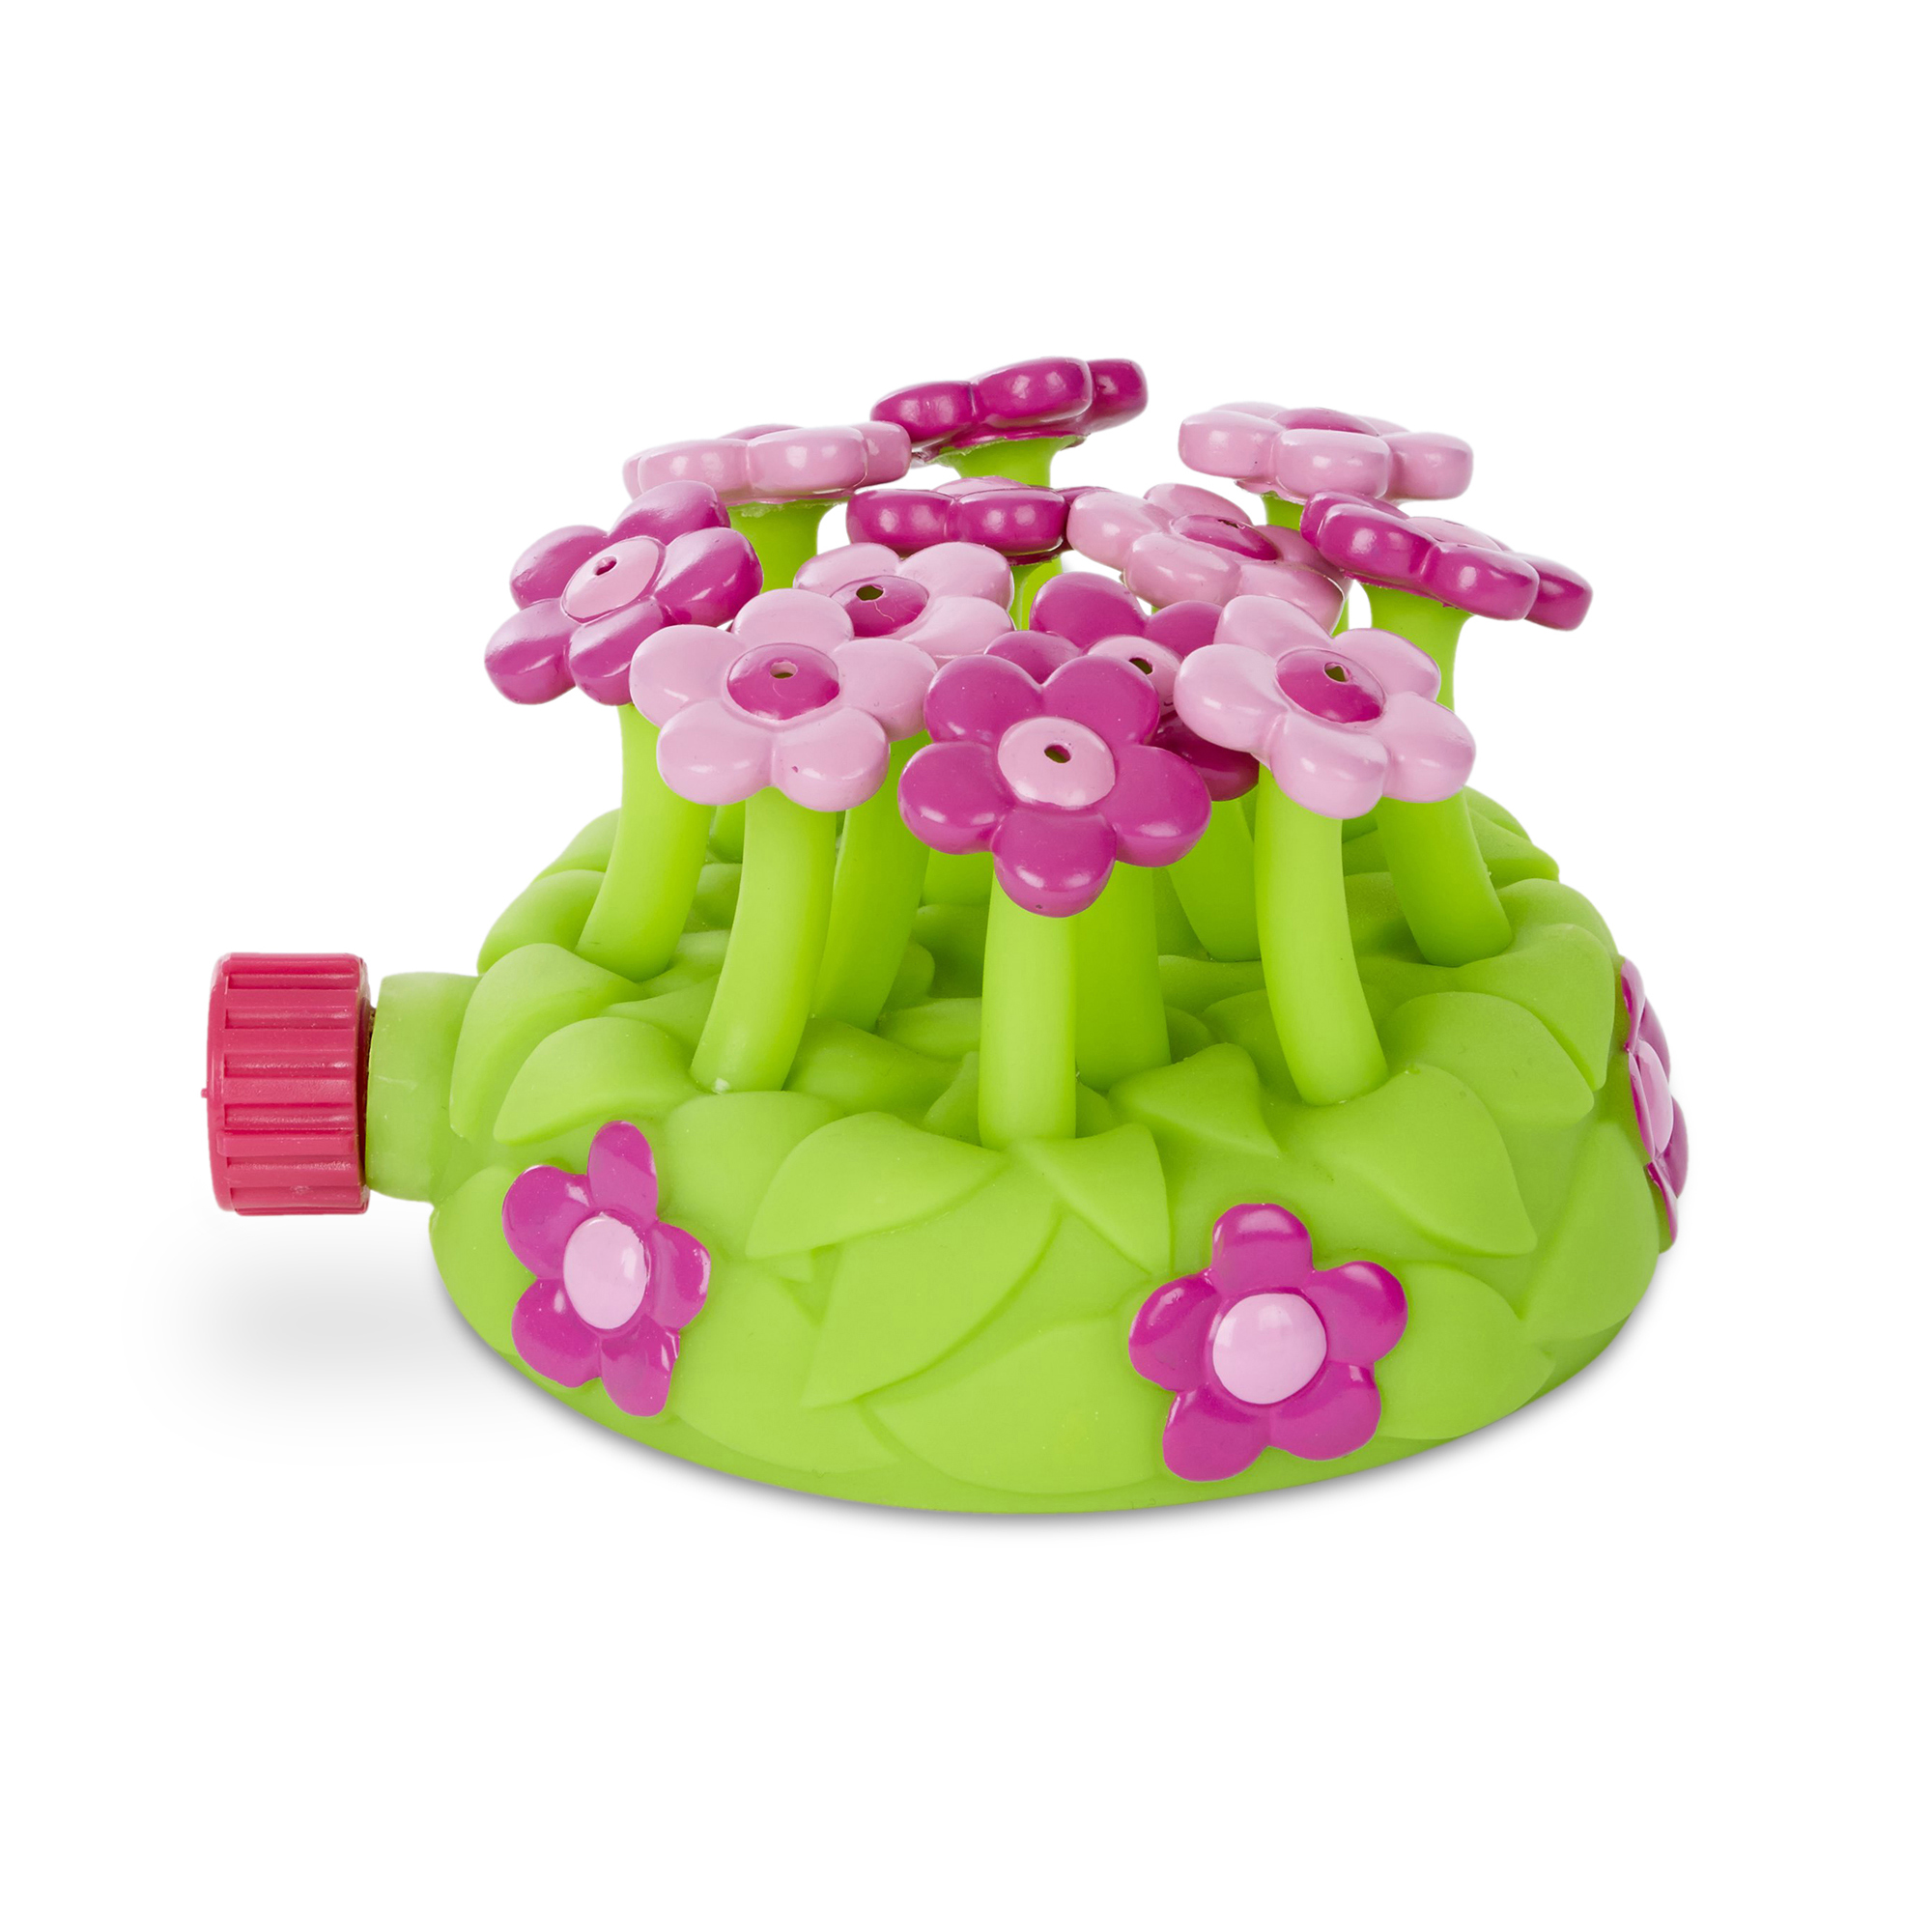 Melissa & Doug Sunny Patch Pretty Petals Flower Sprinkler Toy With Hose Attachment - image 1 of 9